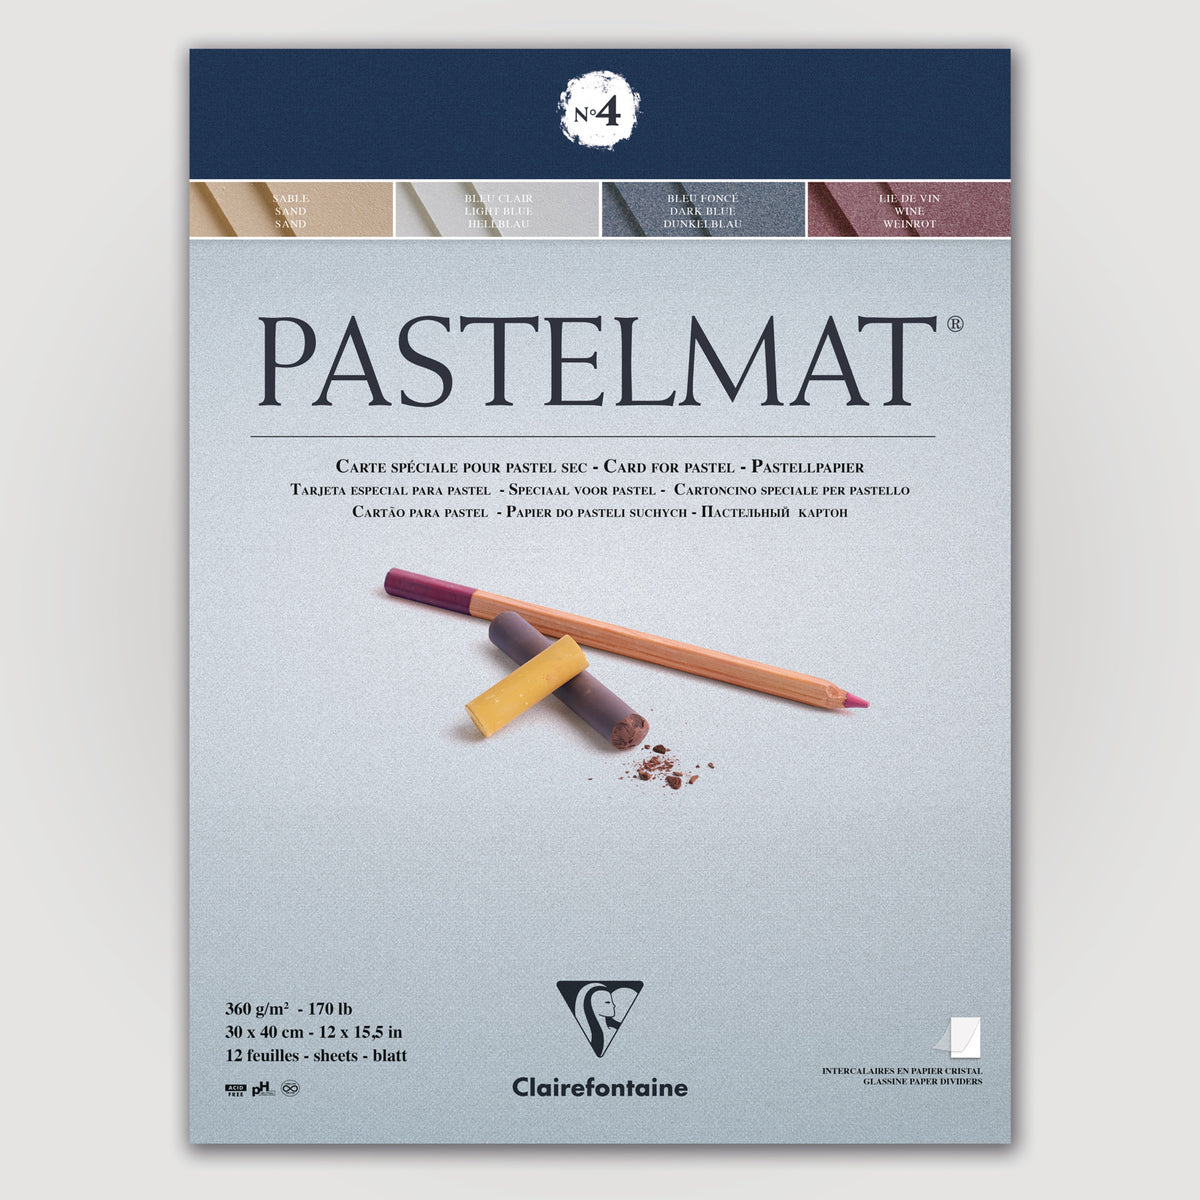 Clairefontaine Pastelmat N°4 360g 30x40 ass 12 sheets